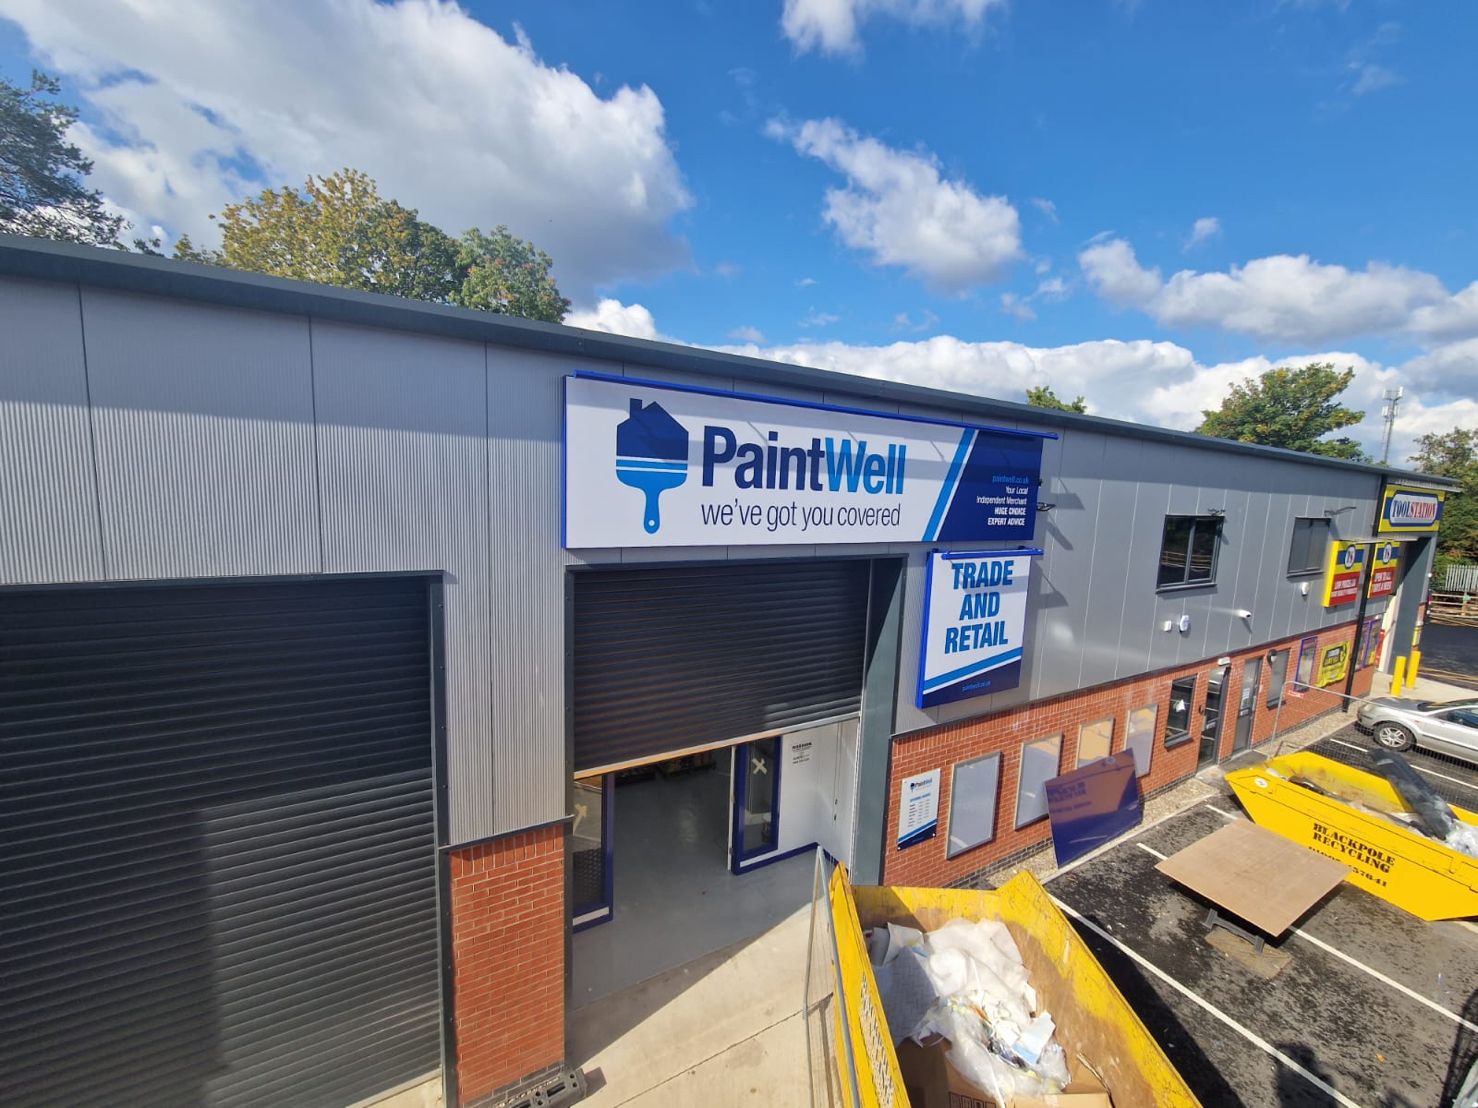 PaintWell Droitwich - Our 7th Store this year! 